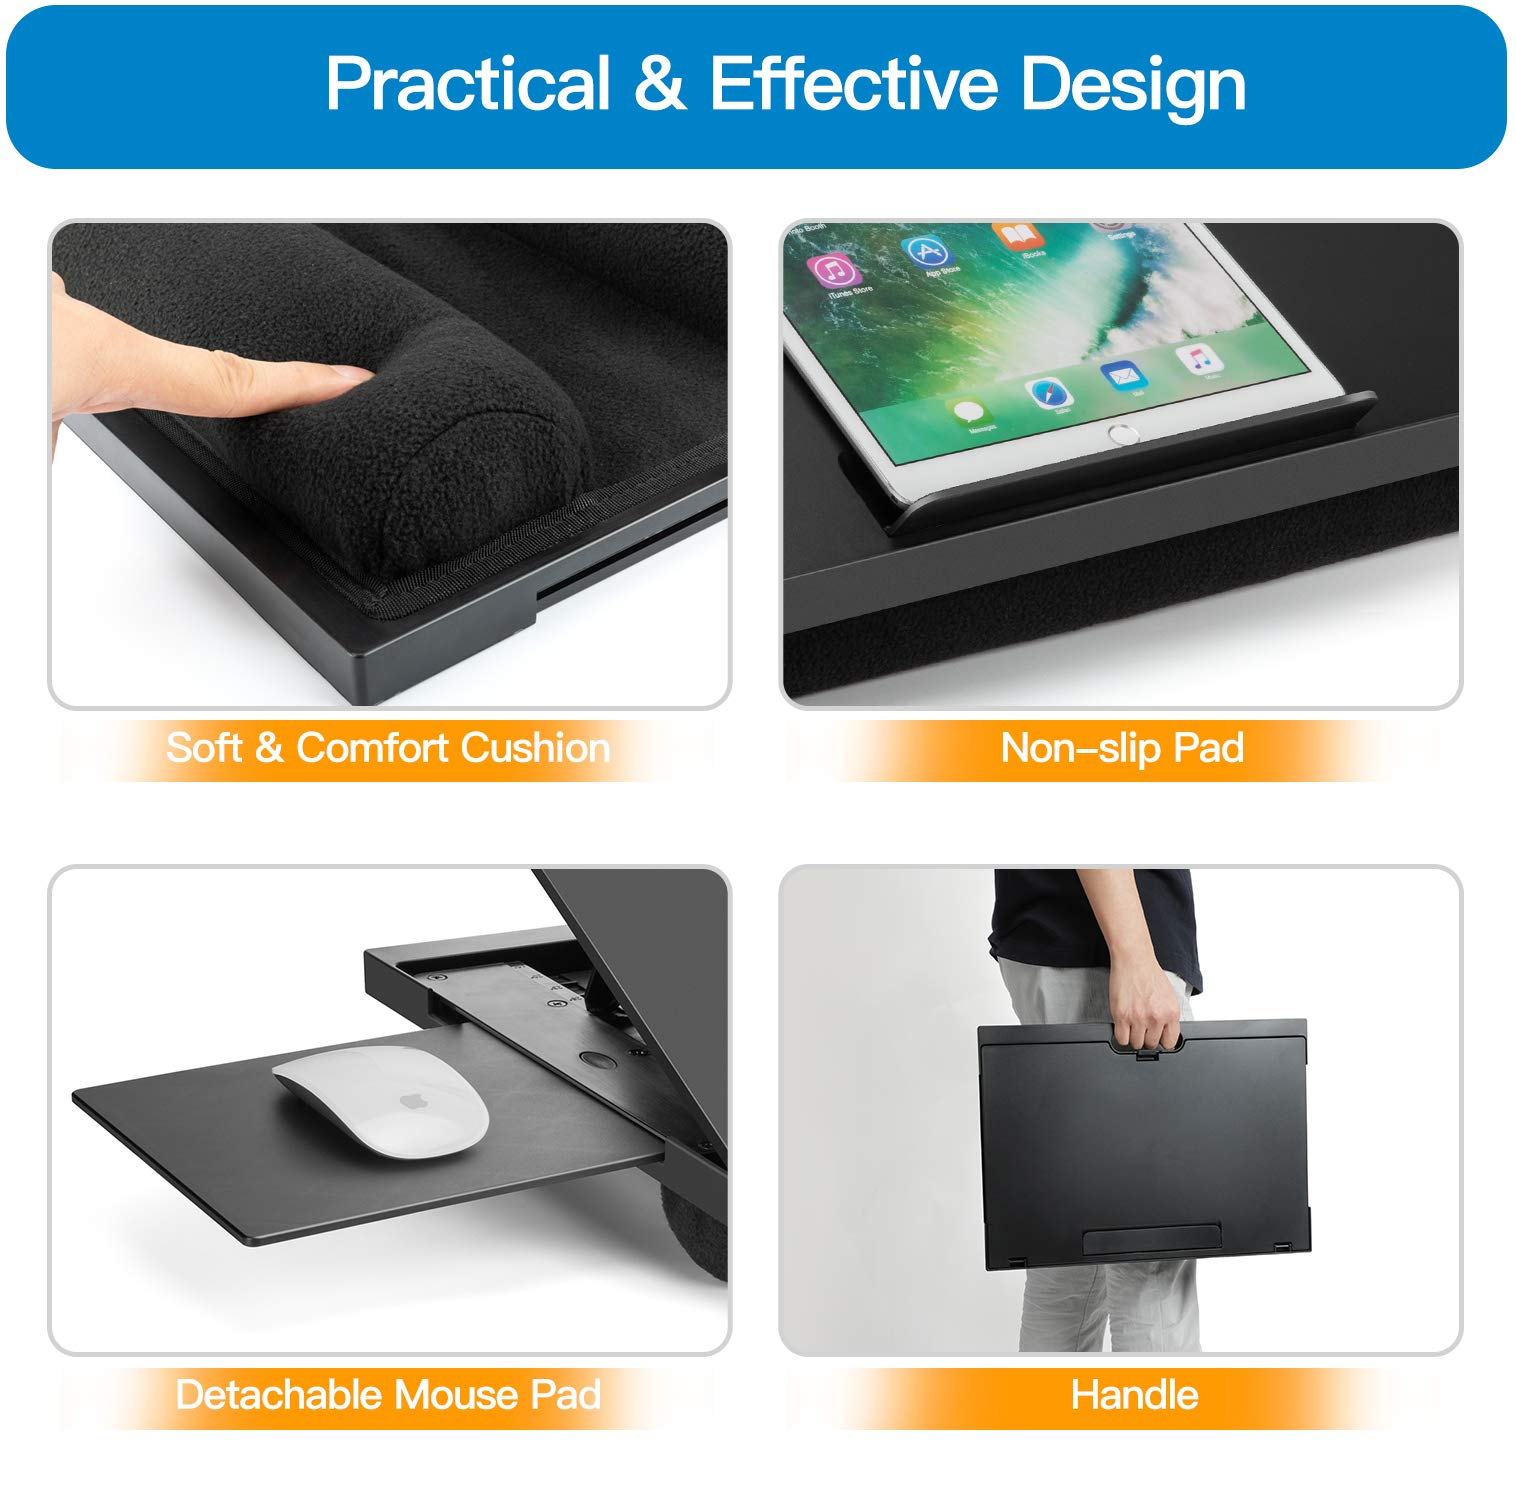 Adjustable Laptop Lap Desk Fits up to 15.6" with 6 Adjustable Angles, Detachable Mouse Pad, & Dual Cushions - image 5 of 8